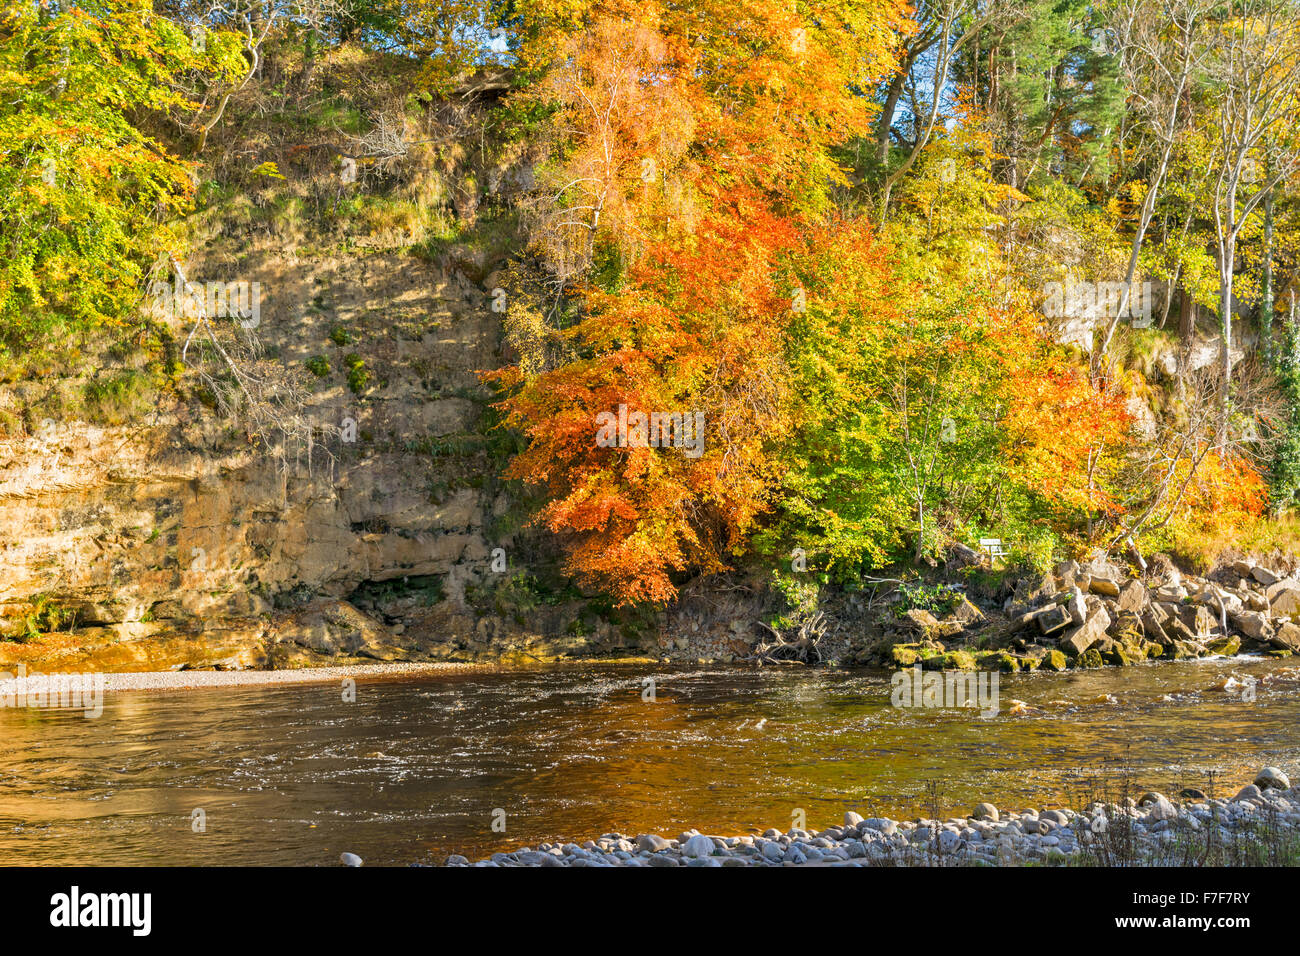 RIVER FINDHORN MORAY SCOTLAND AUTUMNAL BEECH TREES OVERHANG THE RIVER Stock Photo